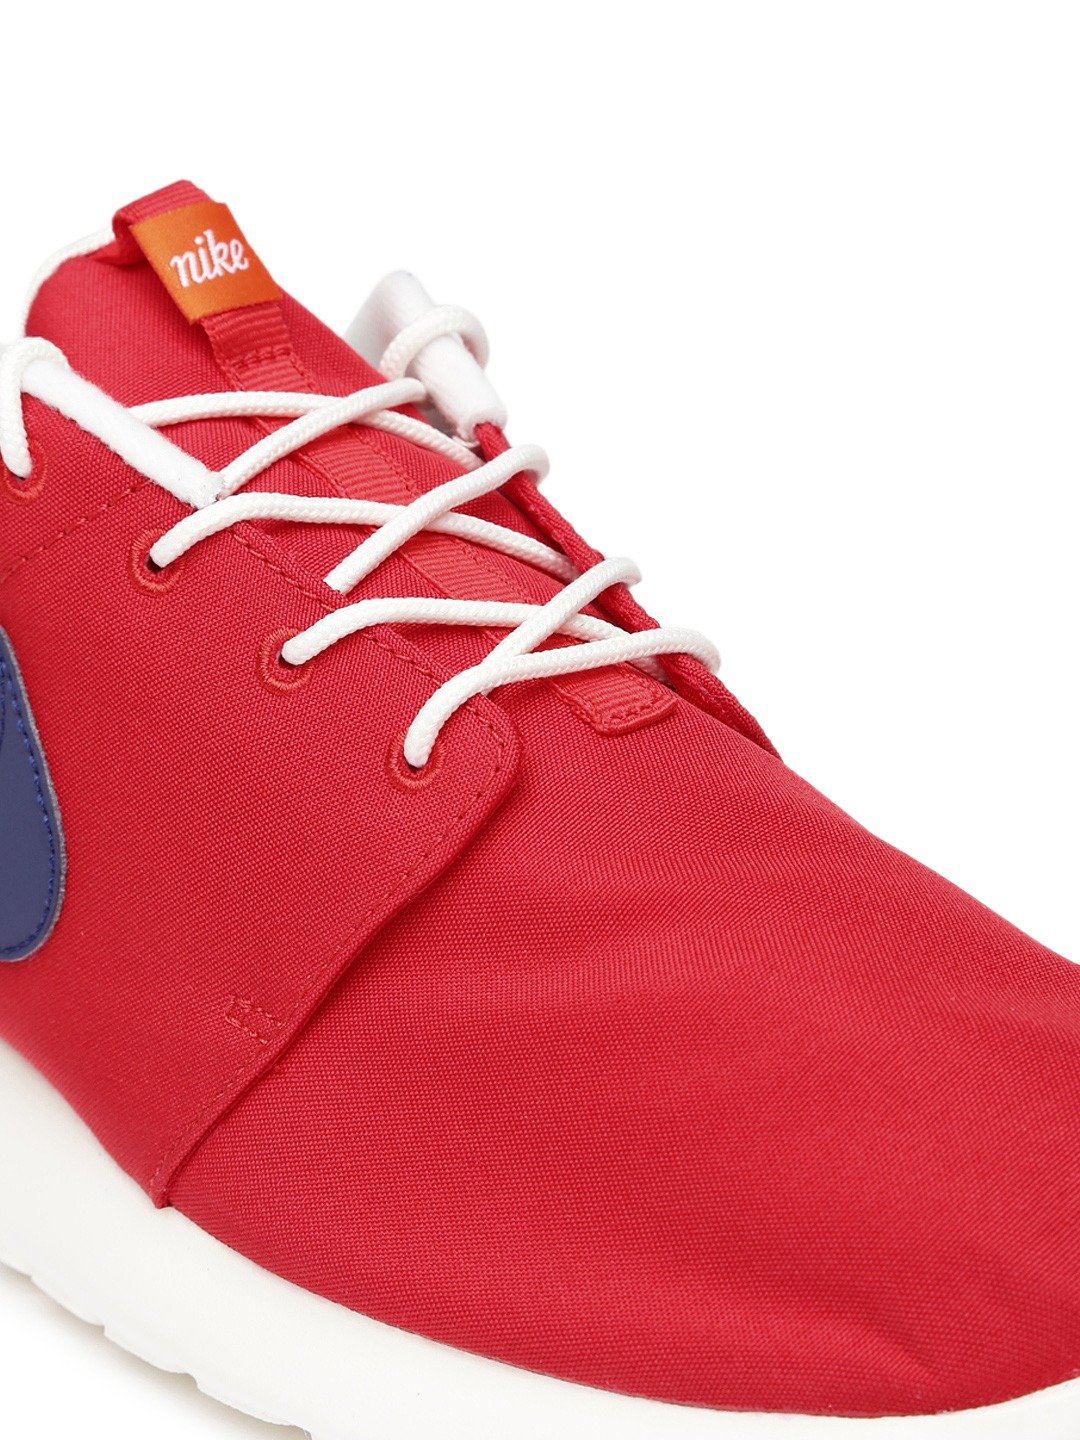 Men Red Roshe One Retro Casual Shoes - Discount Store